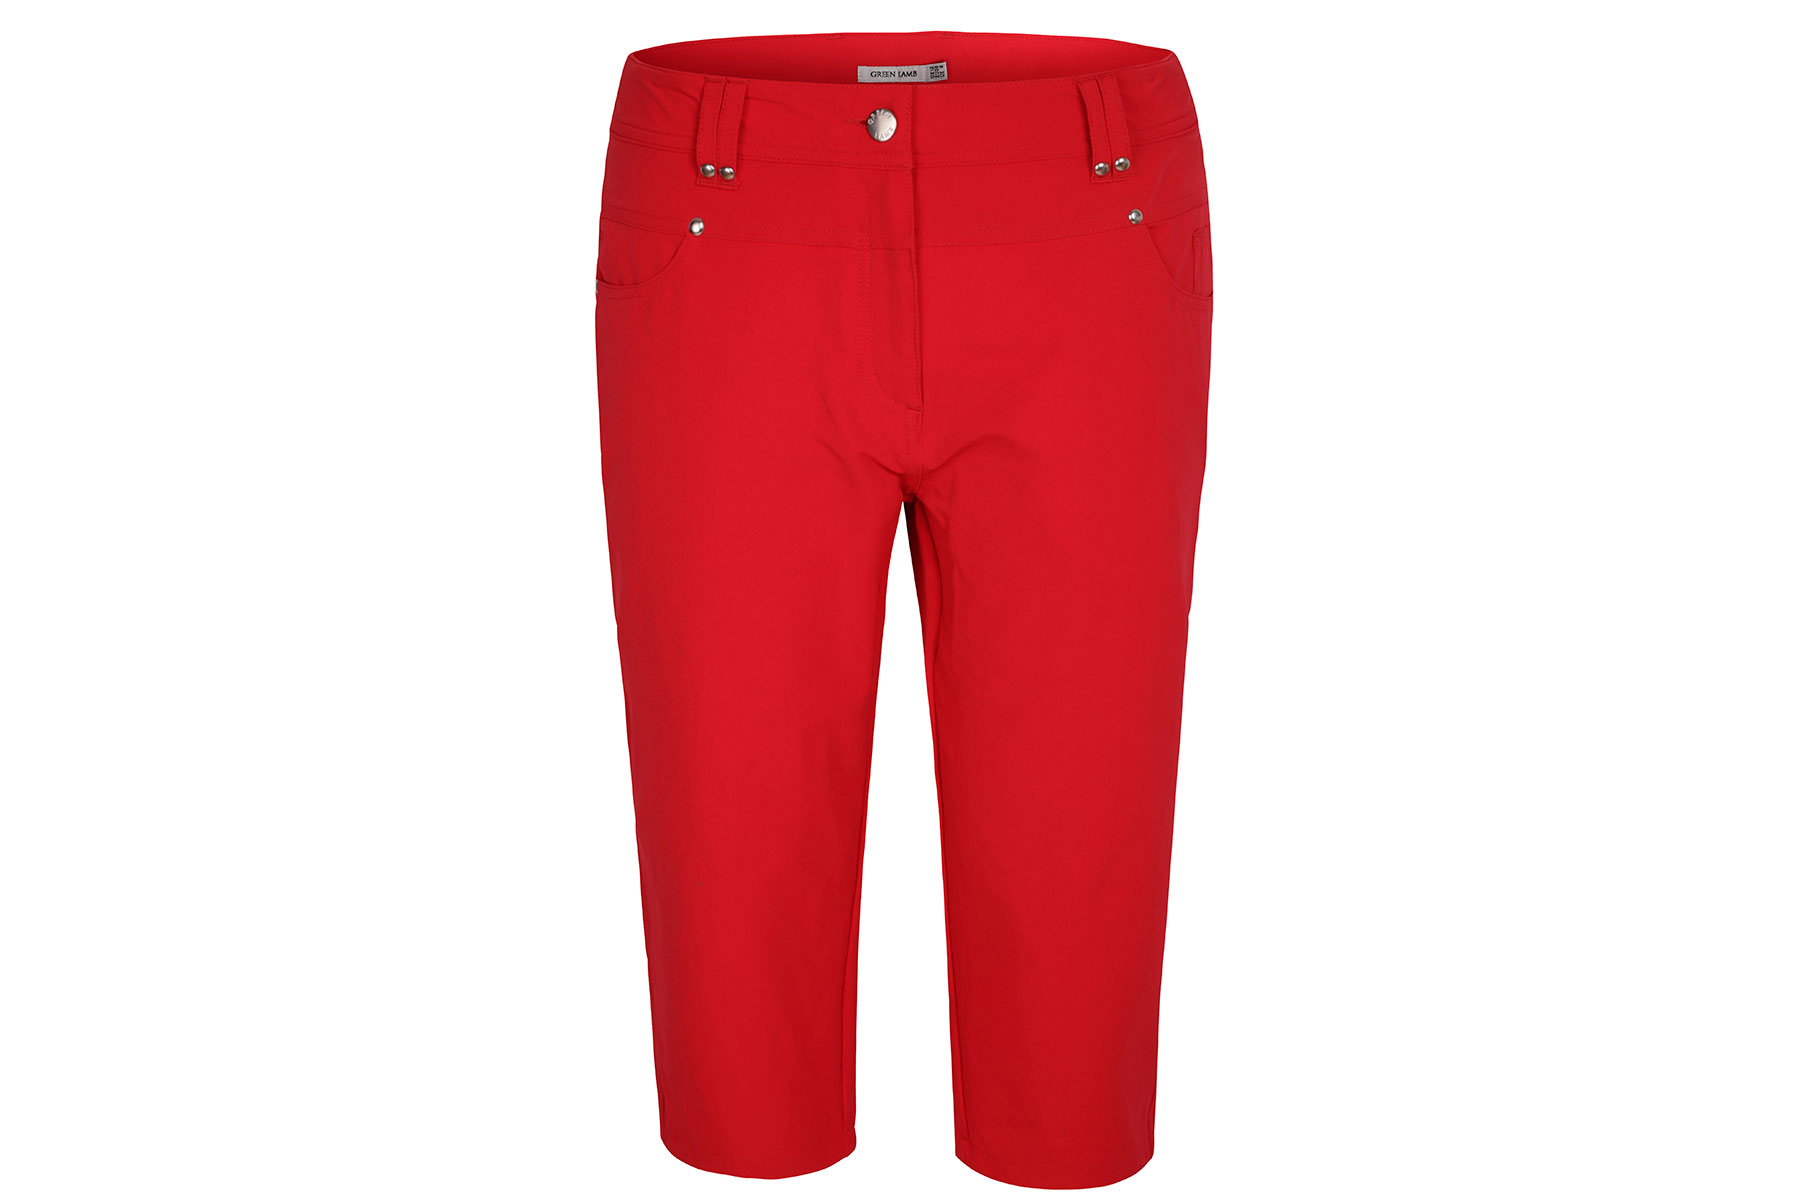 Green Lamb Tracey Ladies Pedal Pushers from american golf